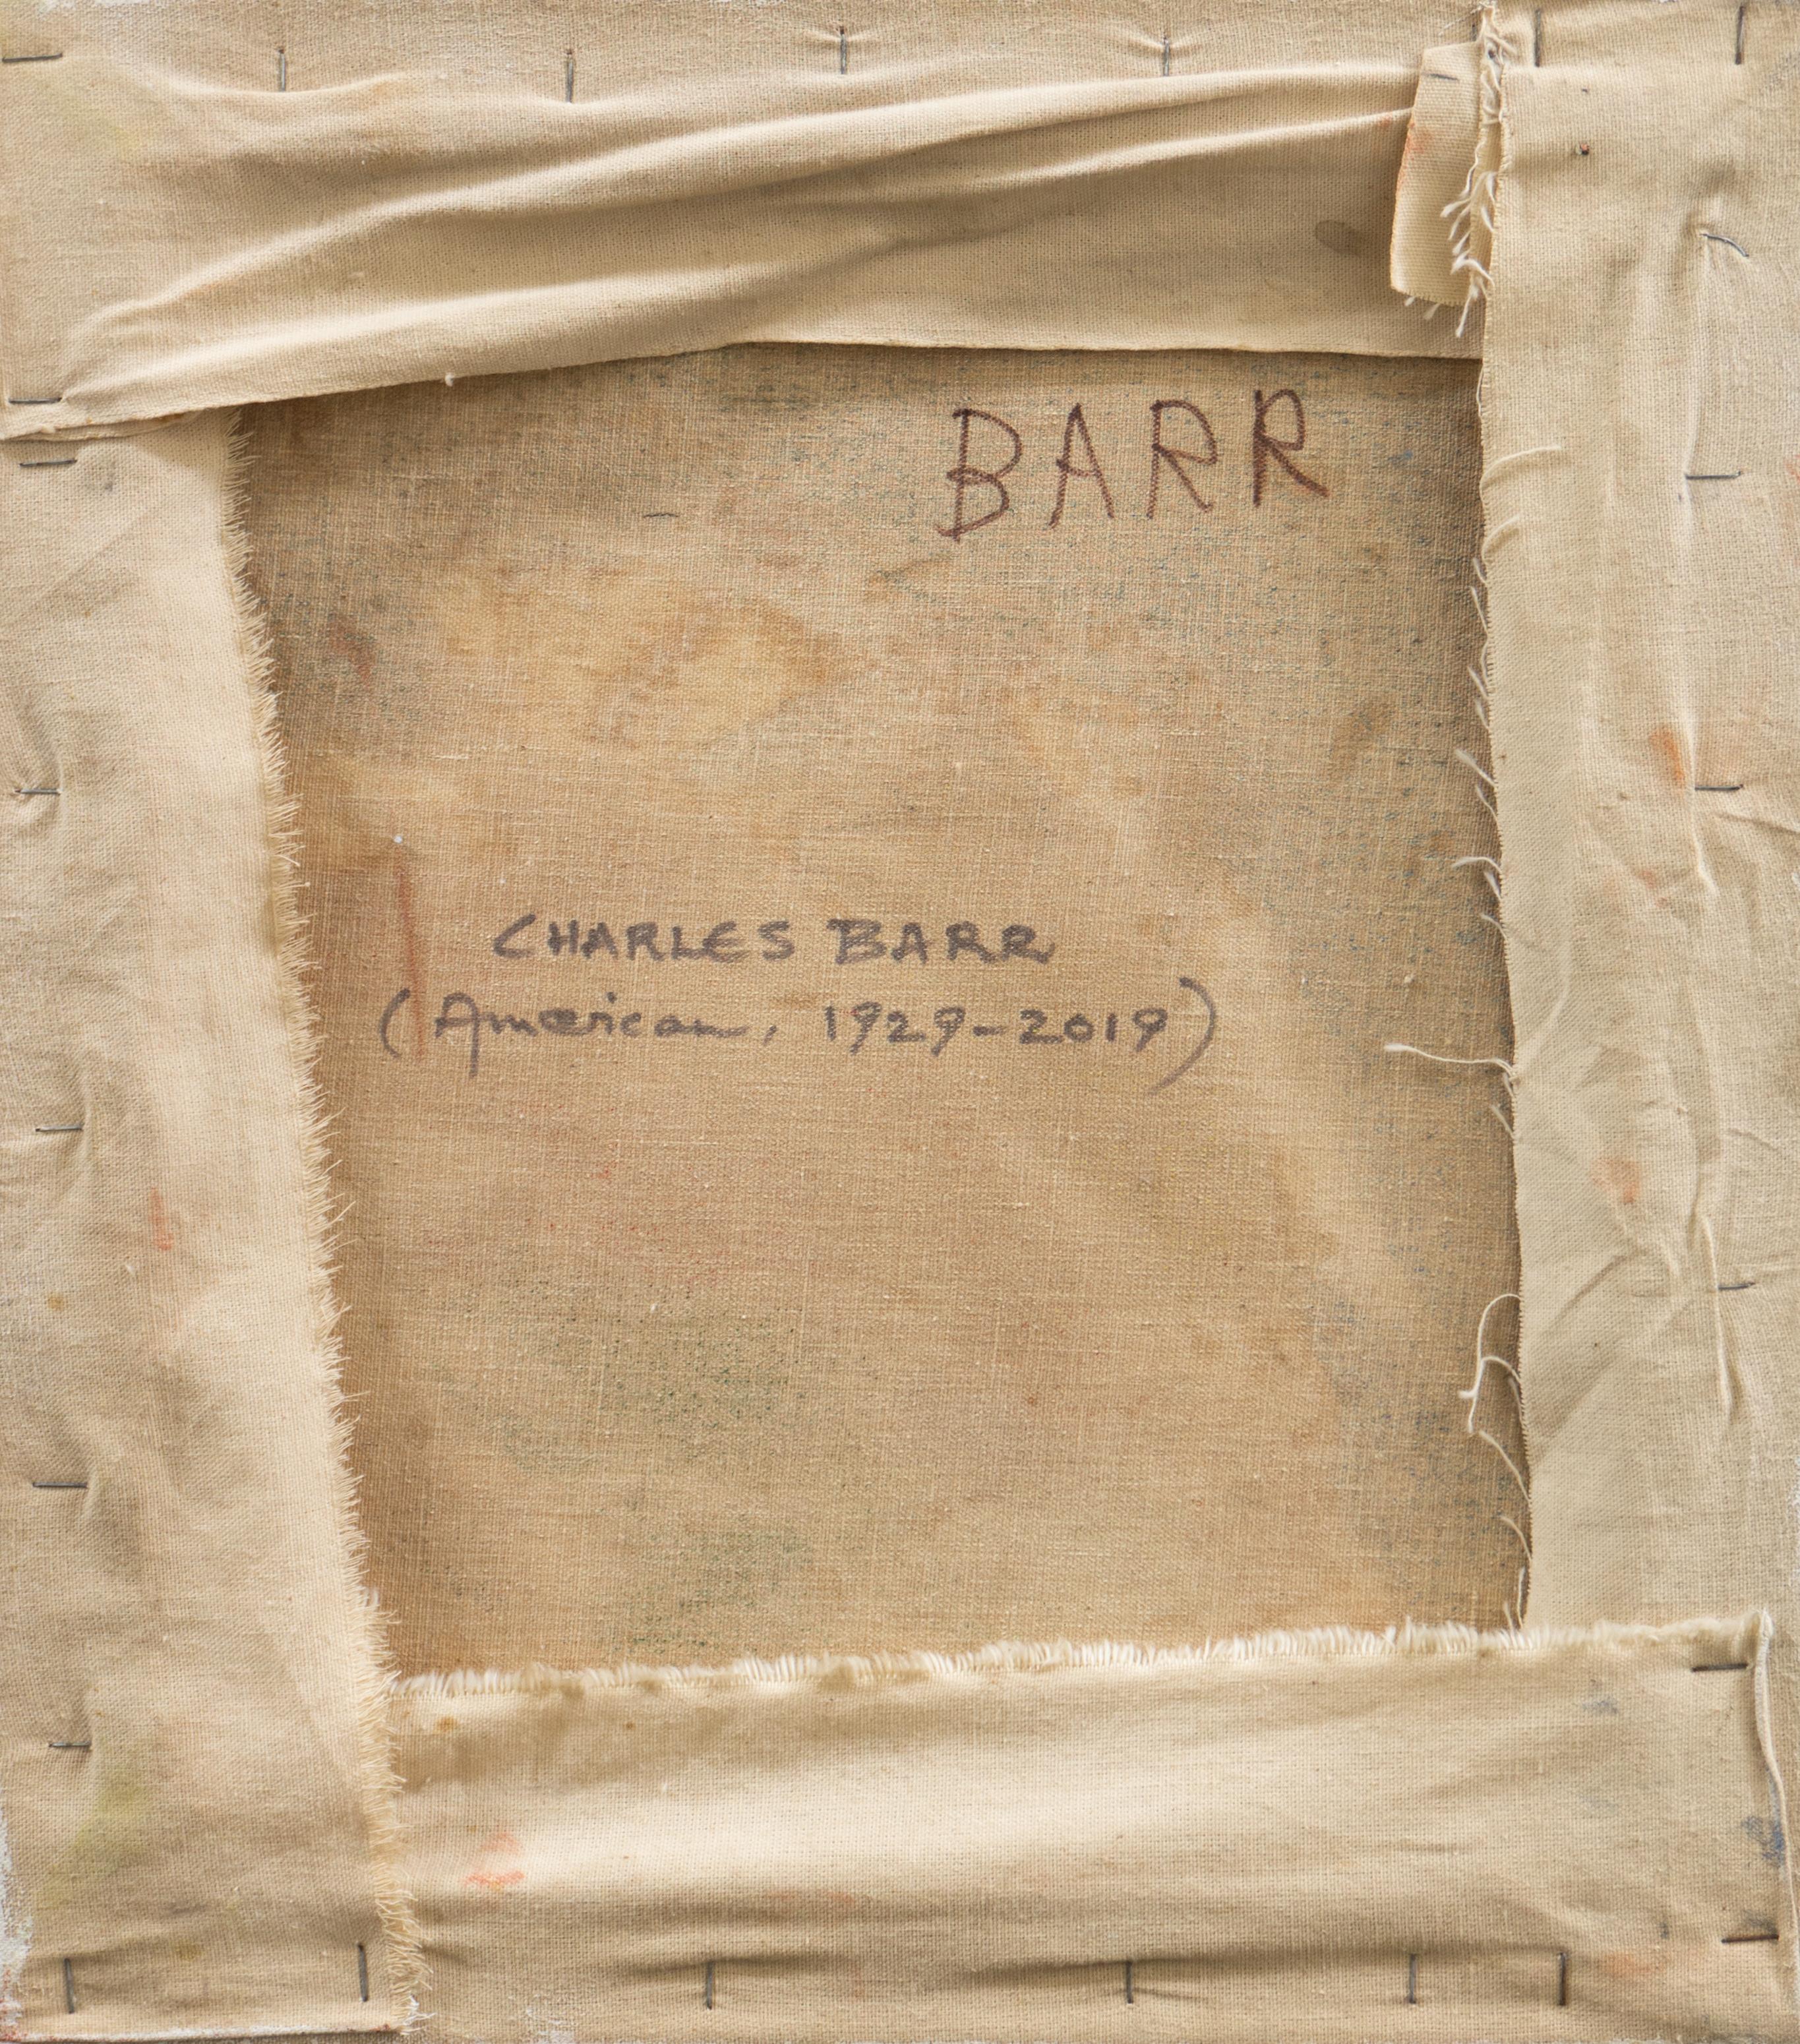 Signed verso, 'Barr' for Charles Barr (American, 1929-2019); additionally inscribed and painted circa 1965.

From the Pittsburgh Post-Gazette, 2019:
CHARLES 